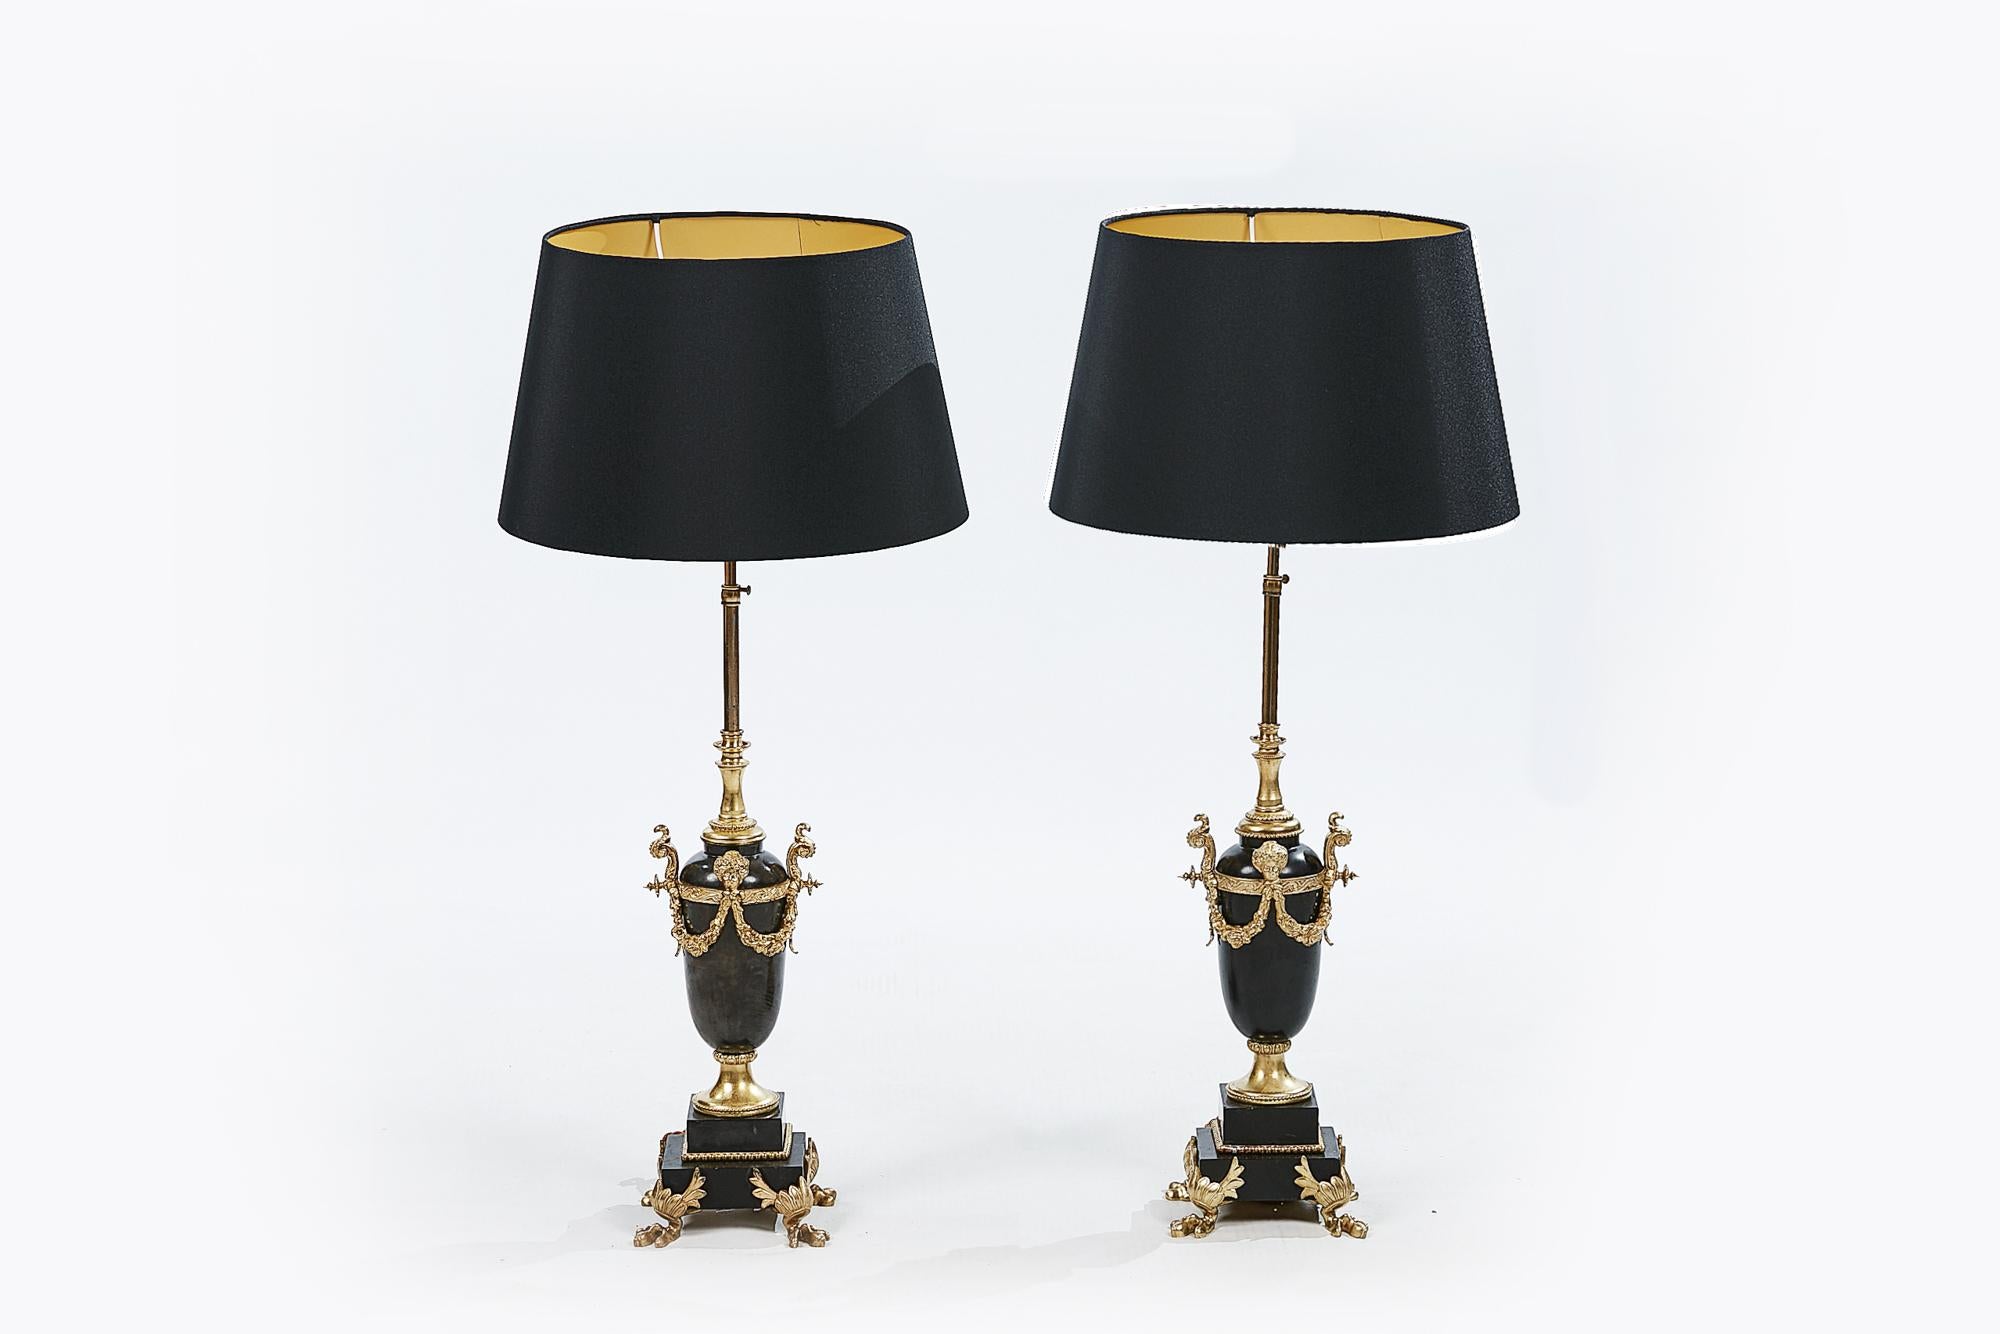 Pair of 20th century marble and gilt lamps in the neoclassical style.